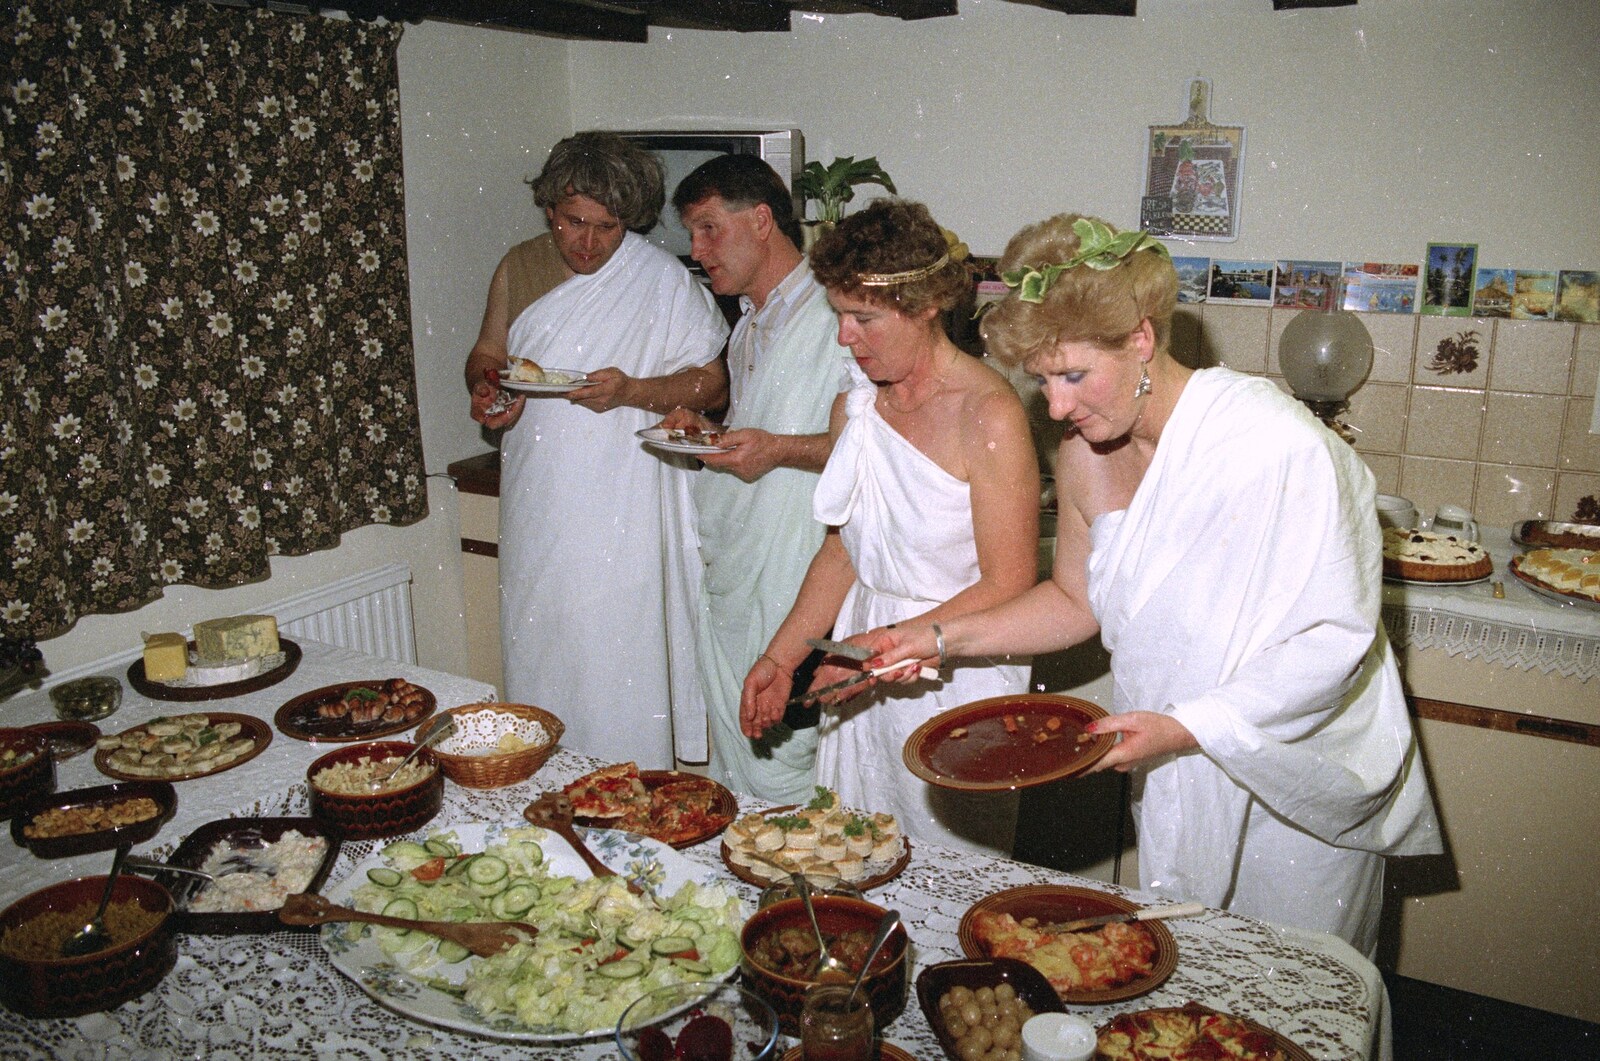 A big pile of food for a Roman toga party from Geoff and Brenda's Pre-Christmas Toga Party, Stuston, Suffolk - 17th December 1991